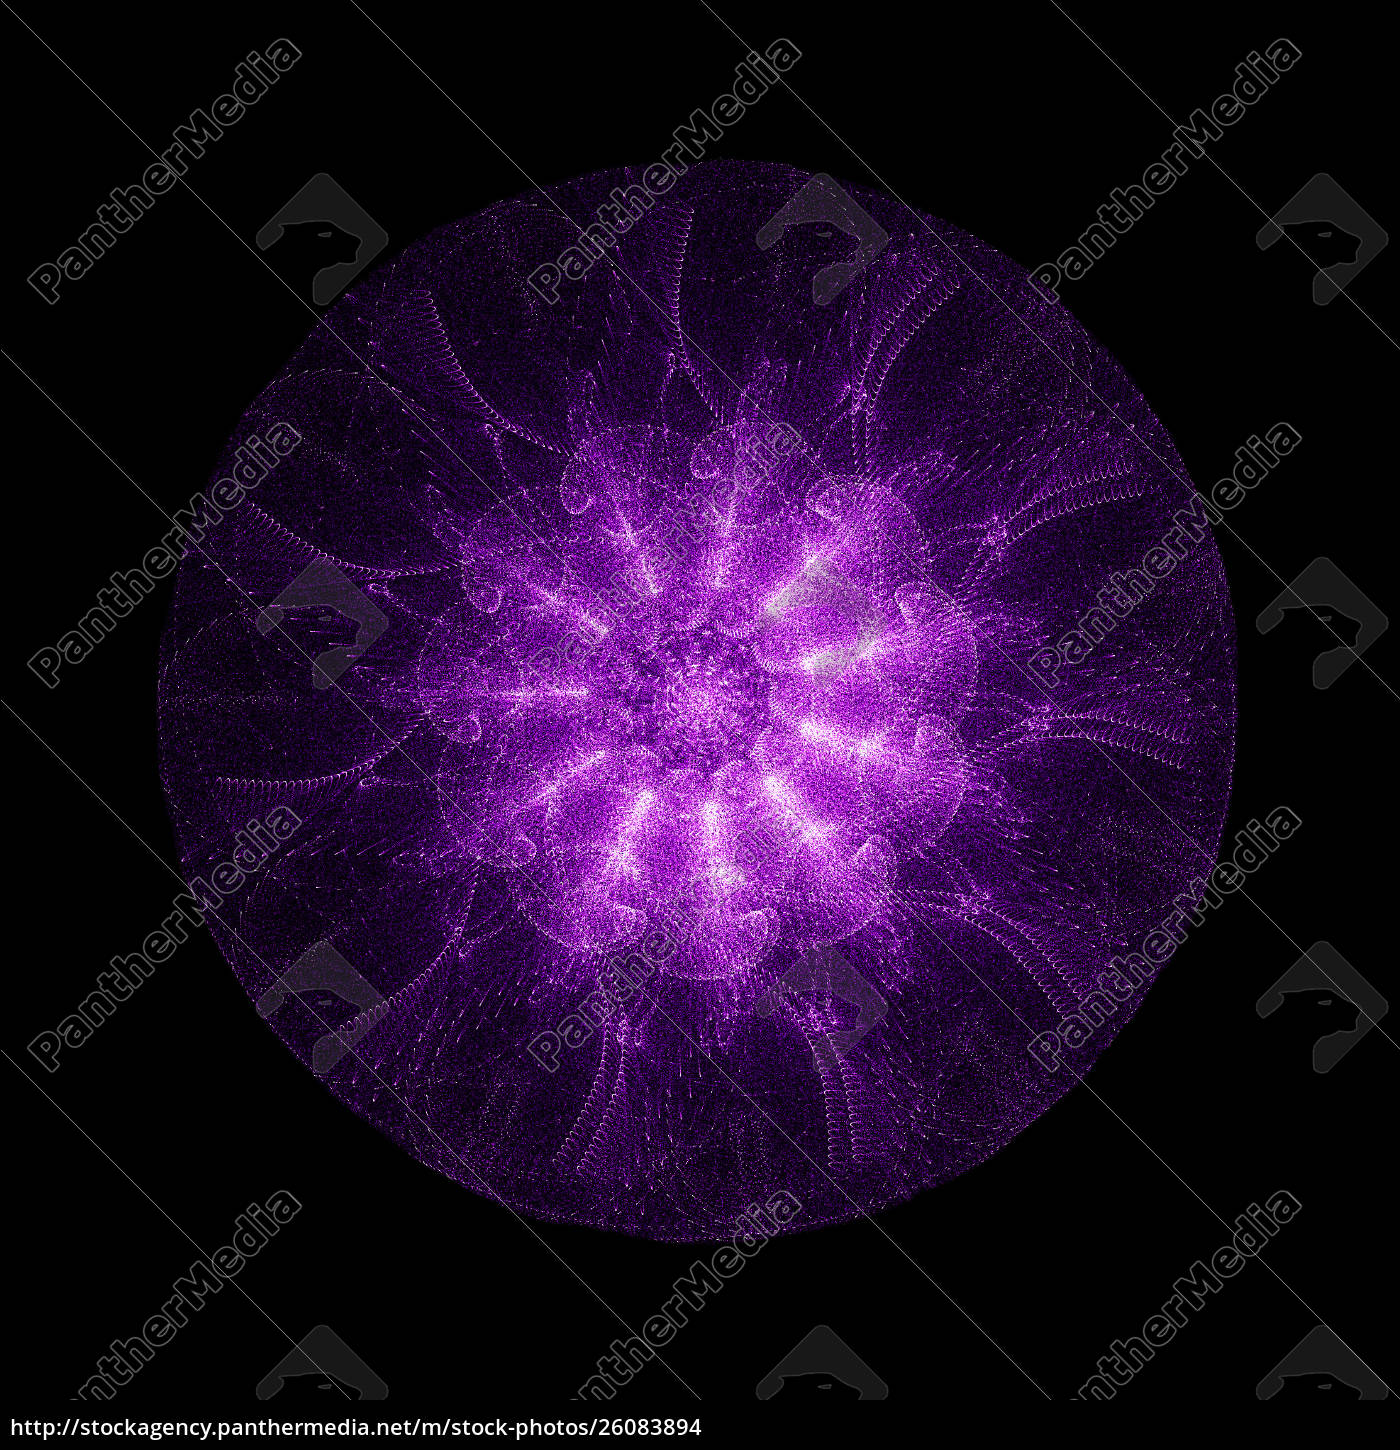 Stock Image 26083894 Abstract Purple Flower Isolated On Black Background